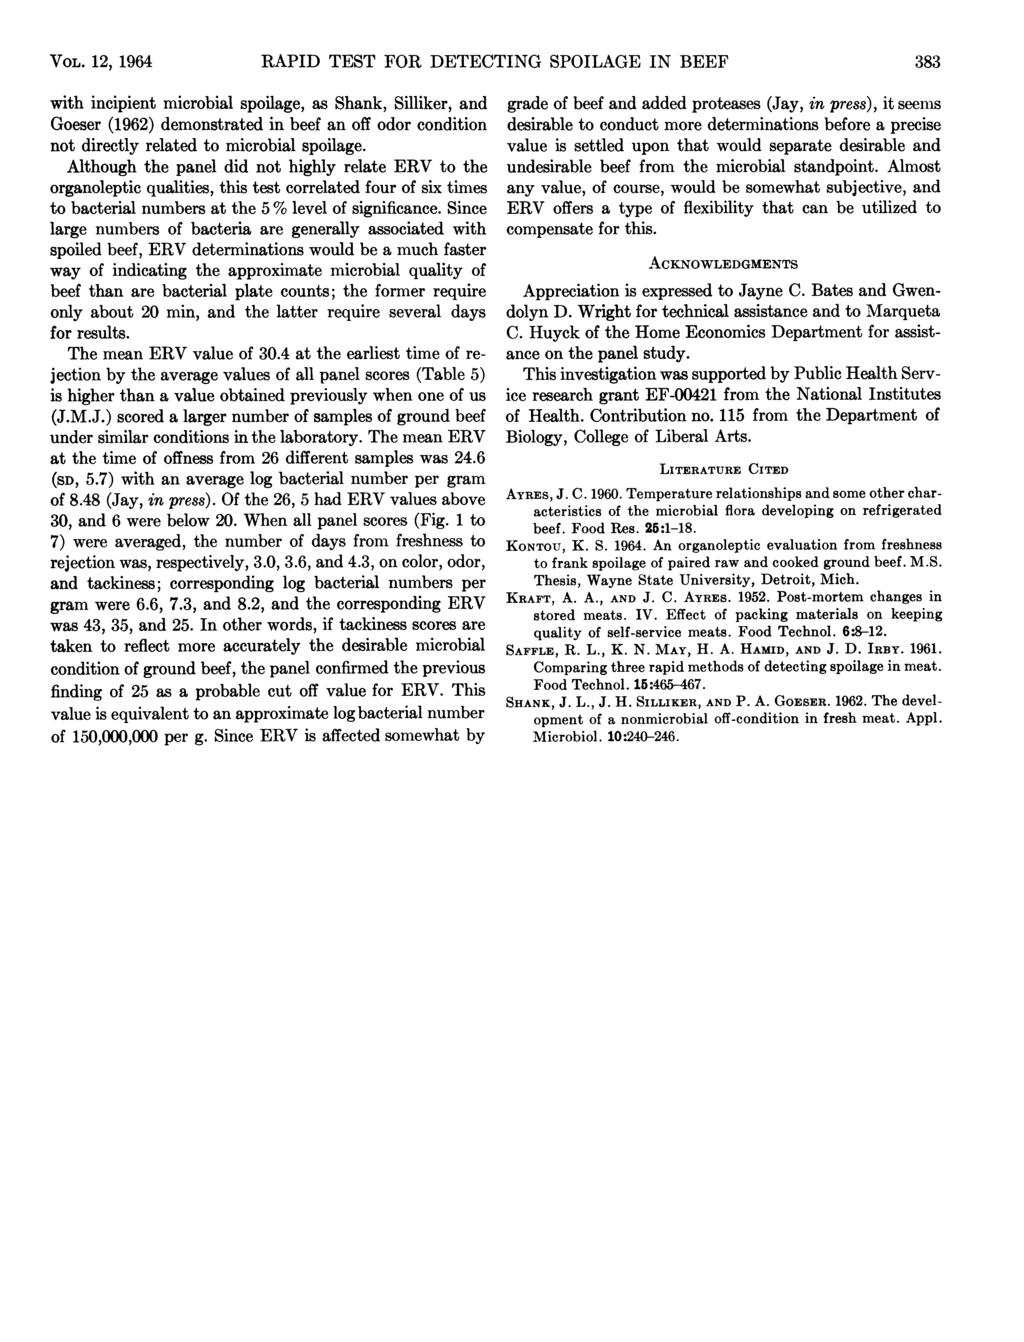 VOL. 12) 1964 RAPID TEST FOR DETECTING SPOILAGE IN BEEF 383 with incipient microbial spoilage, as Shank, Silliker, and Goeser (1962) demonstrated in beef an off odor condition not directly related to